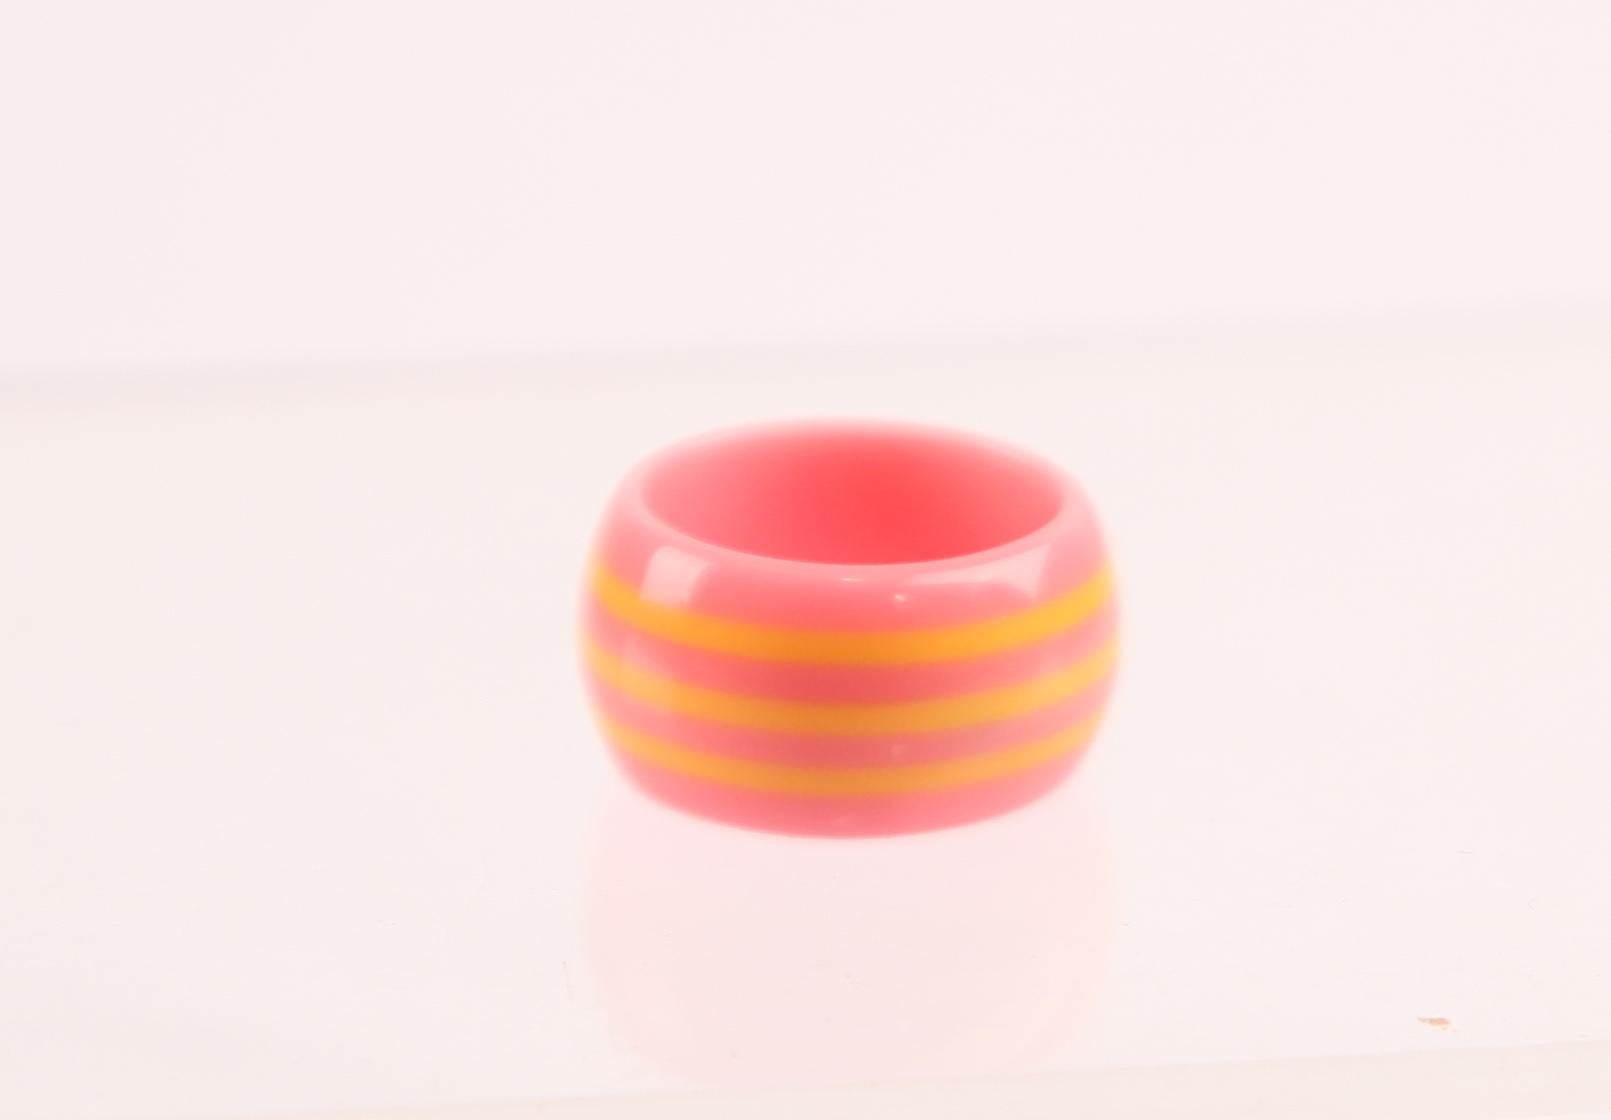 Women's Chanel pink resins novelty ring, Cruise collection, 2003